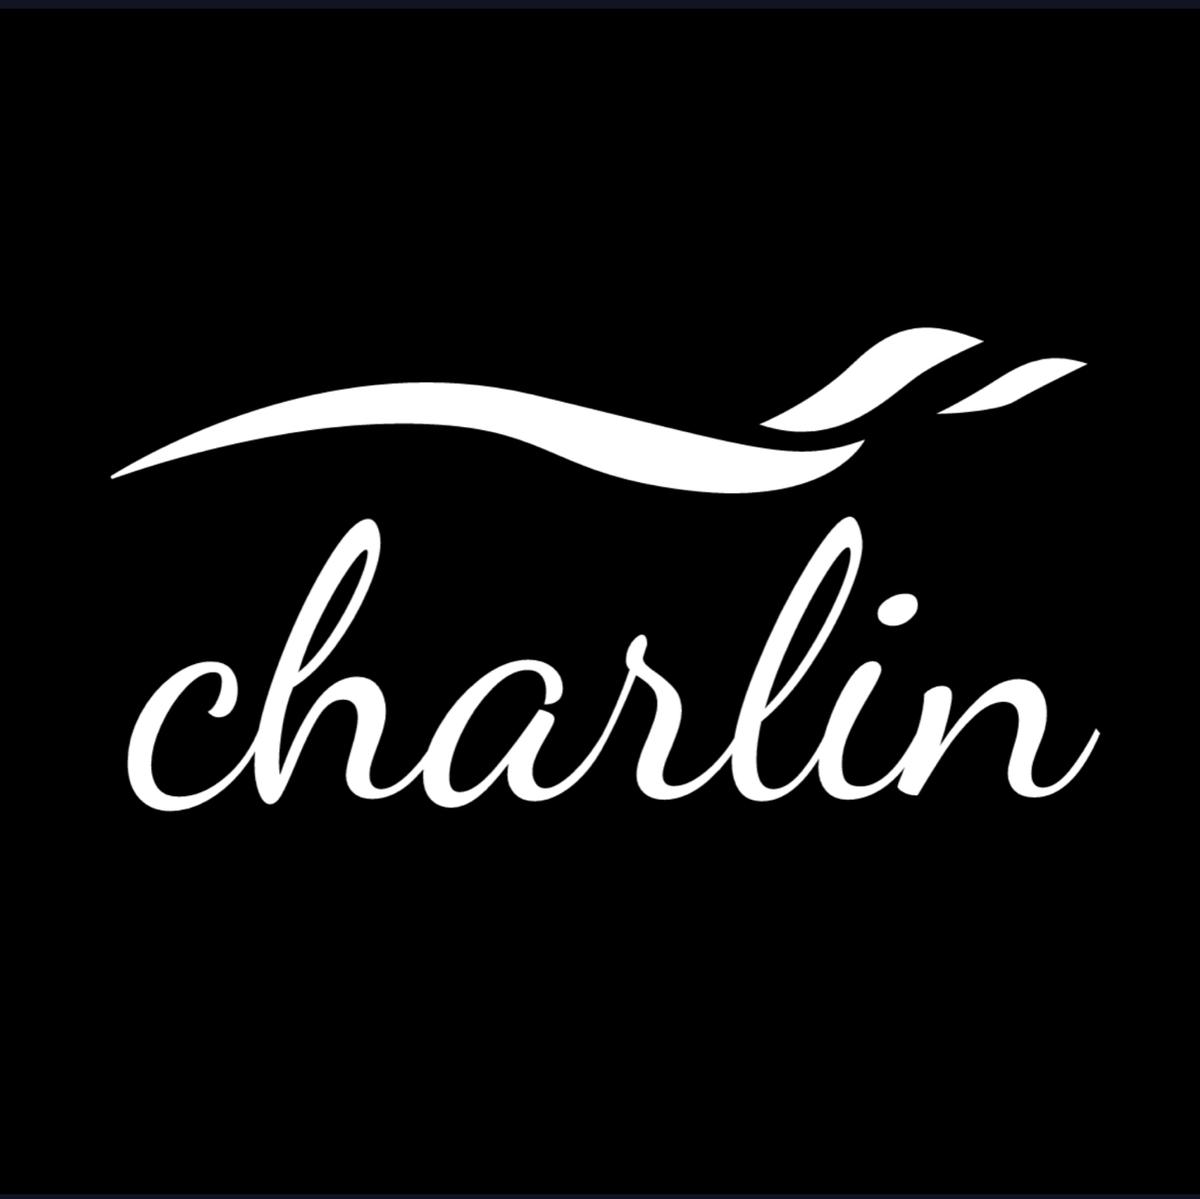 CHARLIN's images